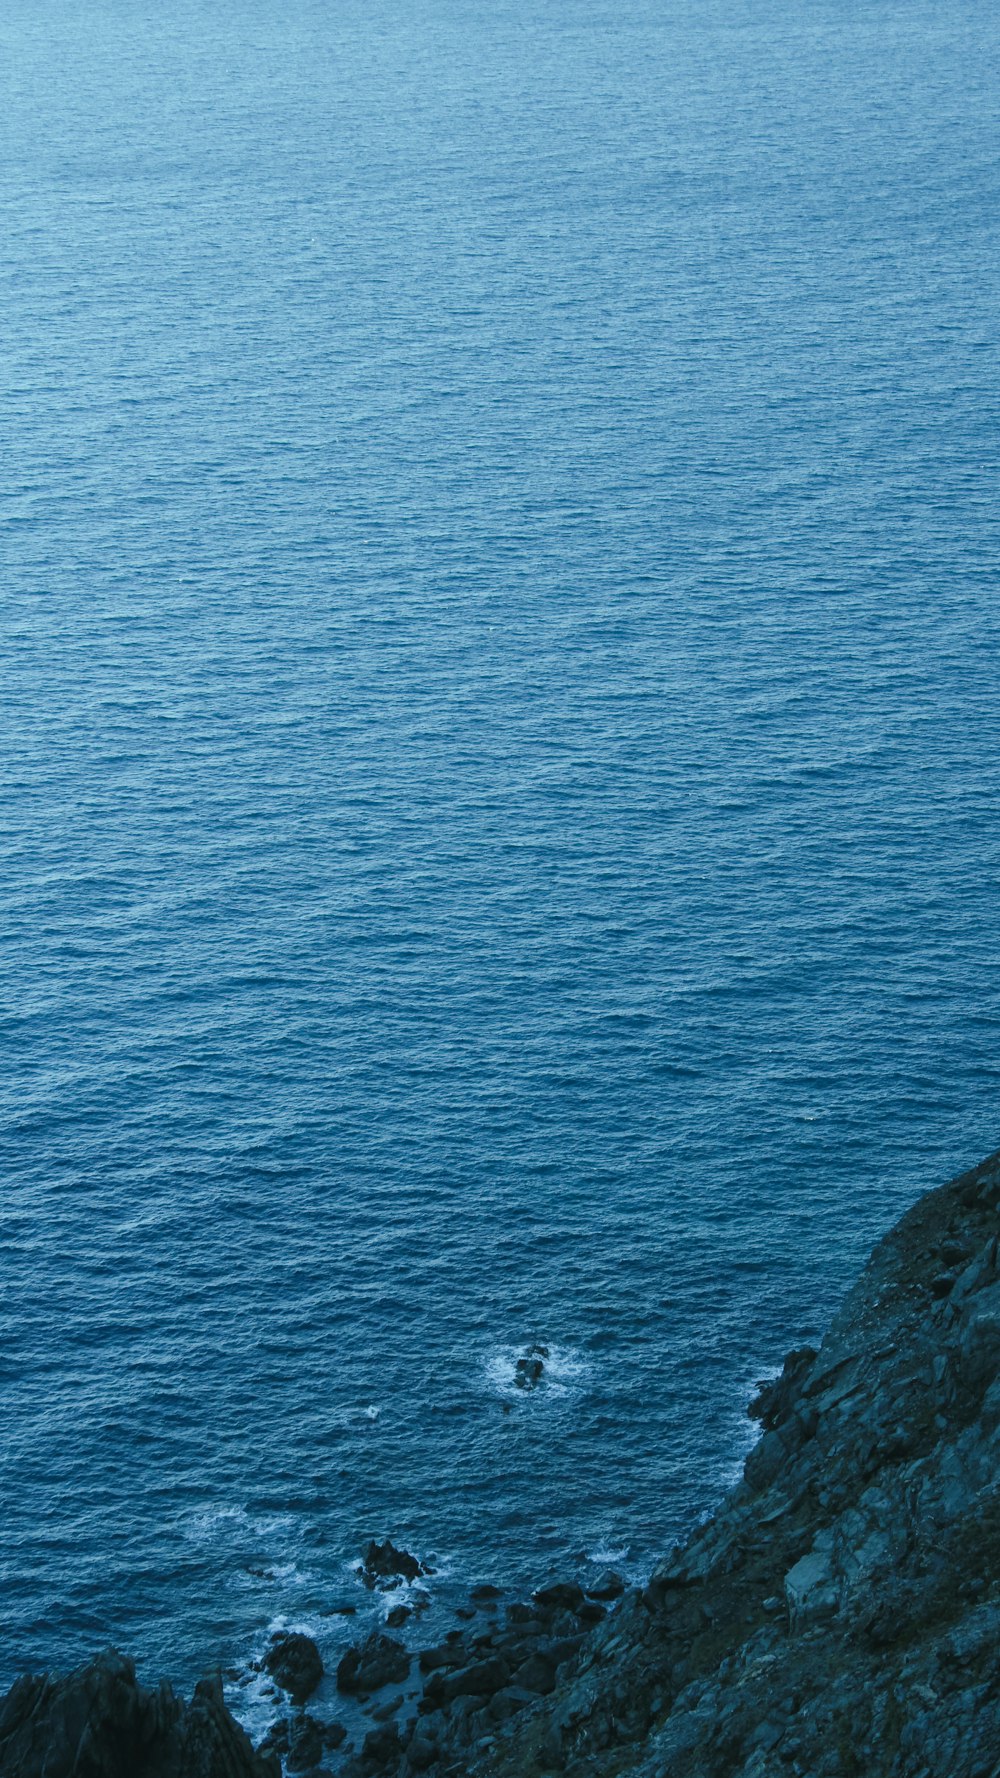 a person sitting on a cliff overlooking the ocean